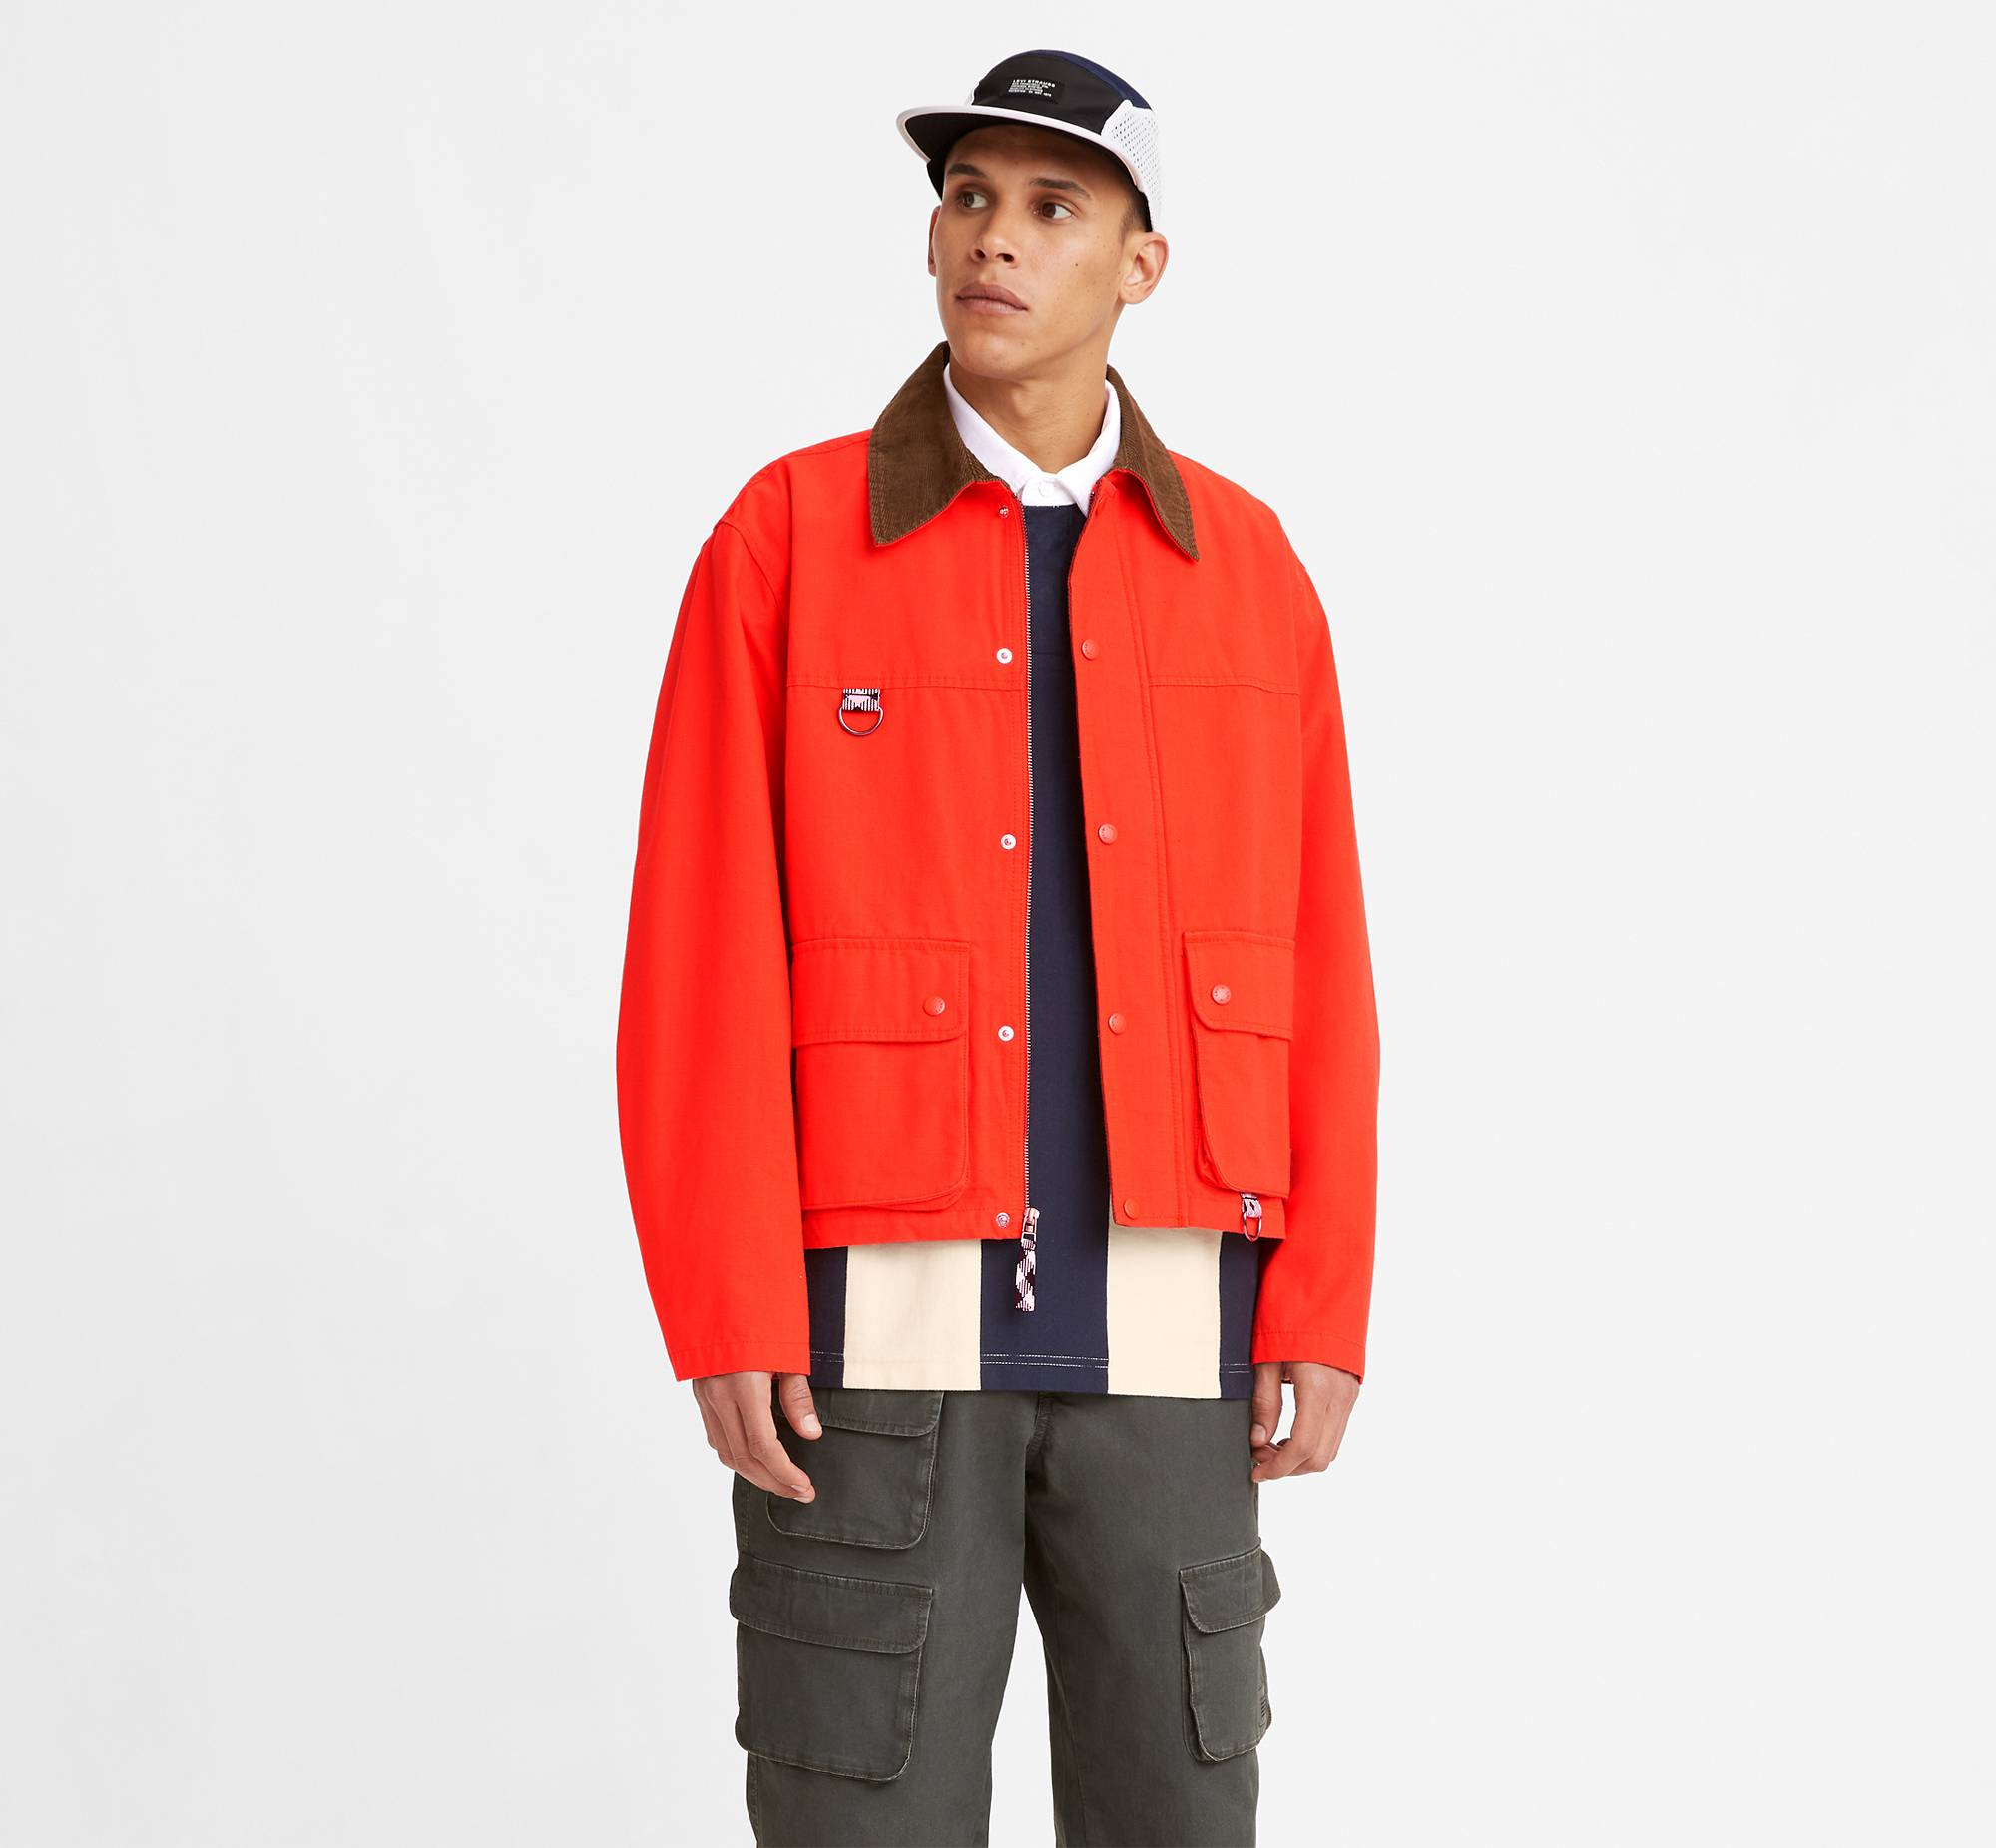 The Fishing Jacket - Red | Levi's® HR